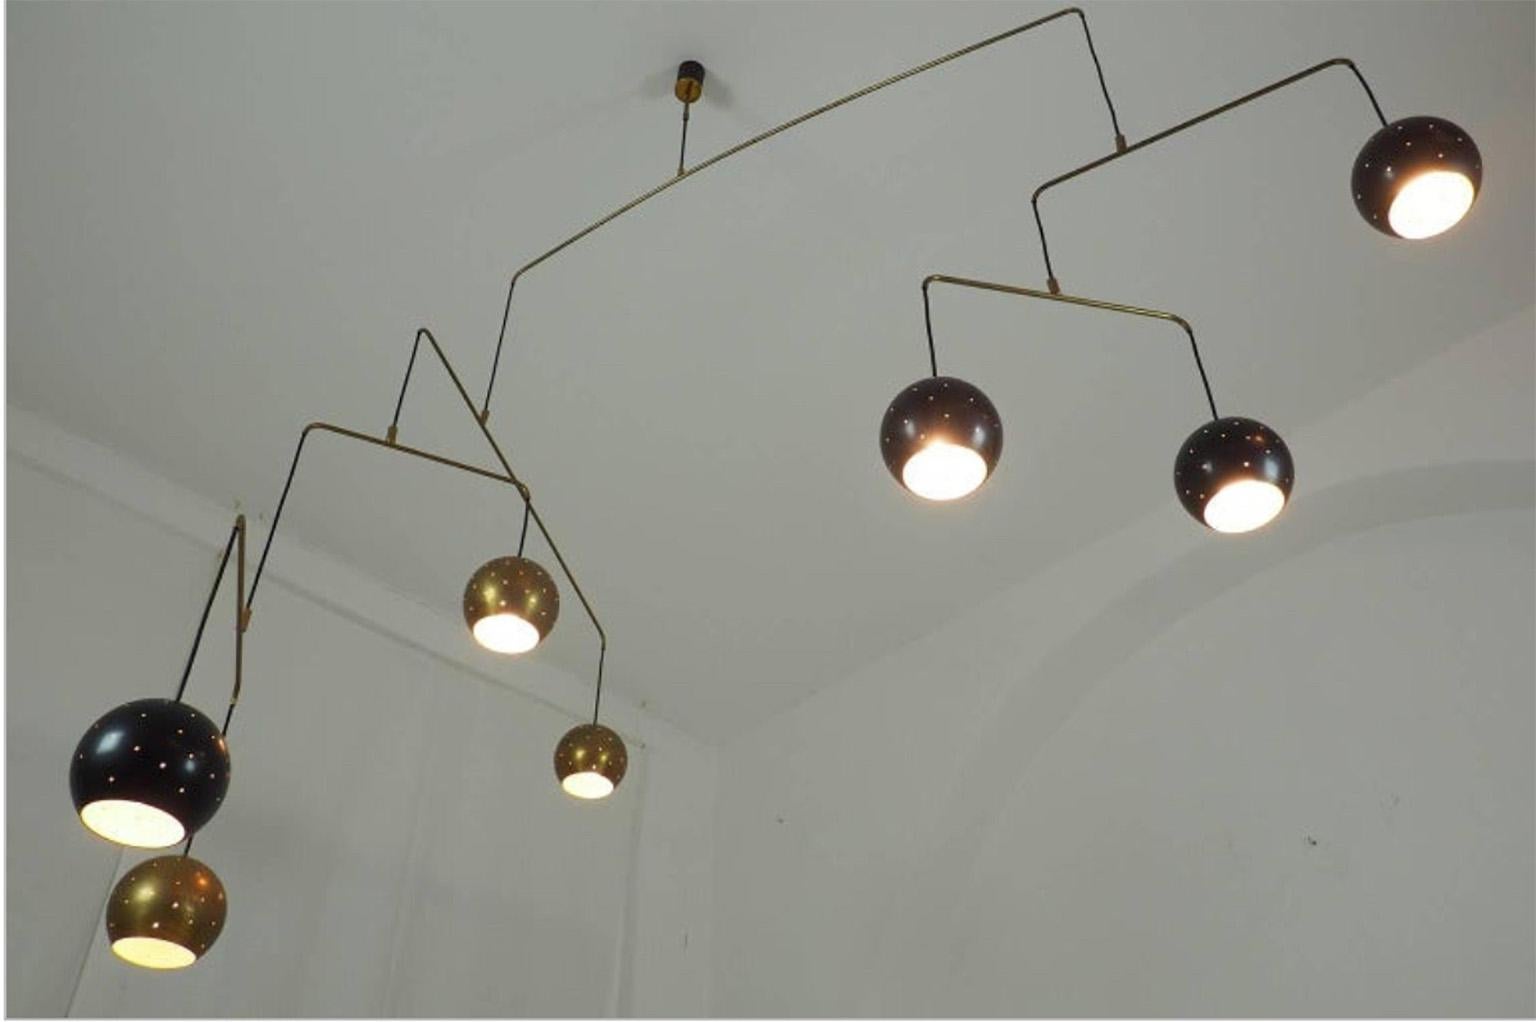 Original Italian brass mobile chandelier manufactured in a very small handcraft production in Milano, 20th century
Large, magic and poetical mobile chandelier with brass and black suspending spheres, it can moves with the flow of air.
Wholly in